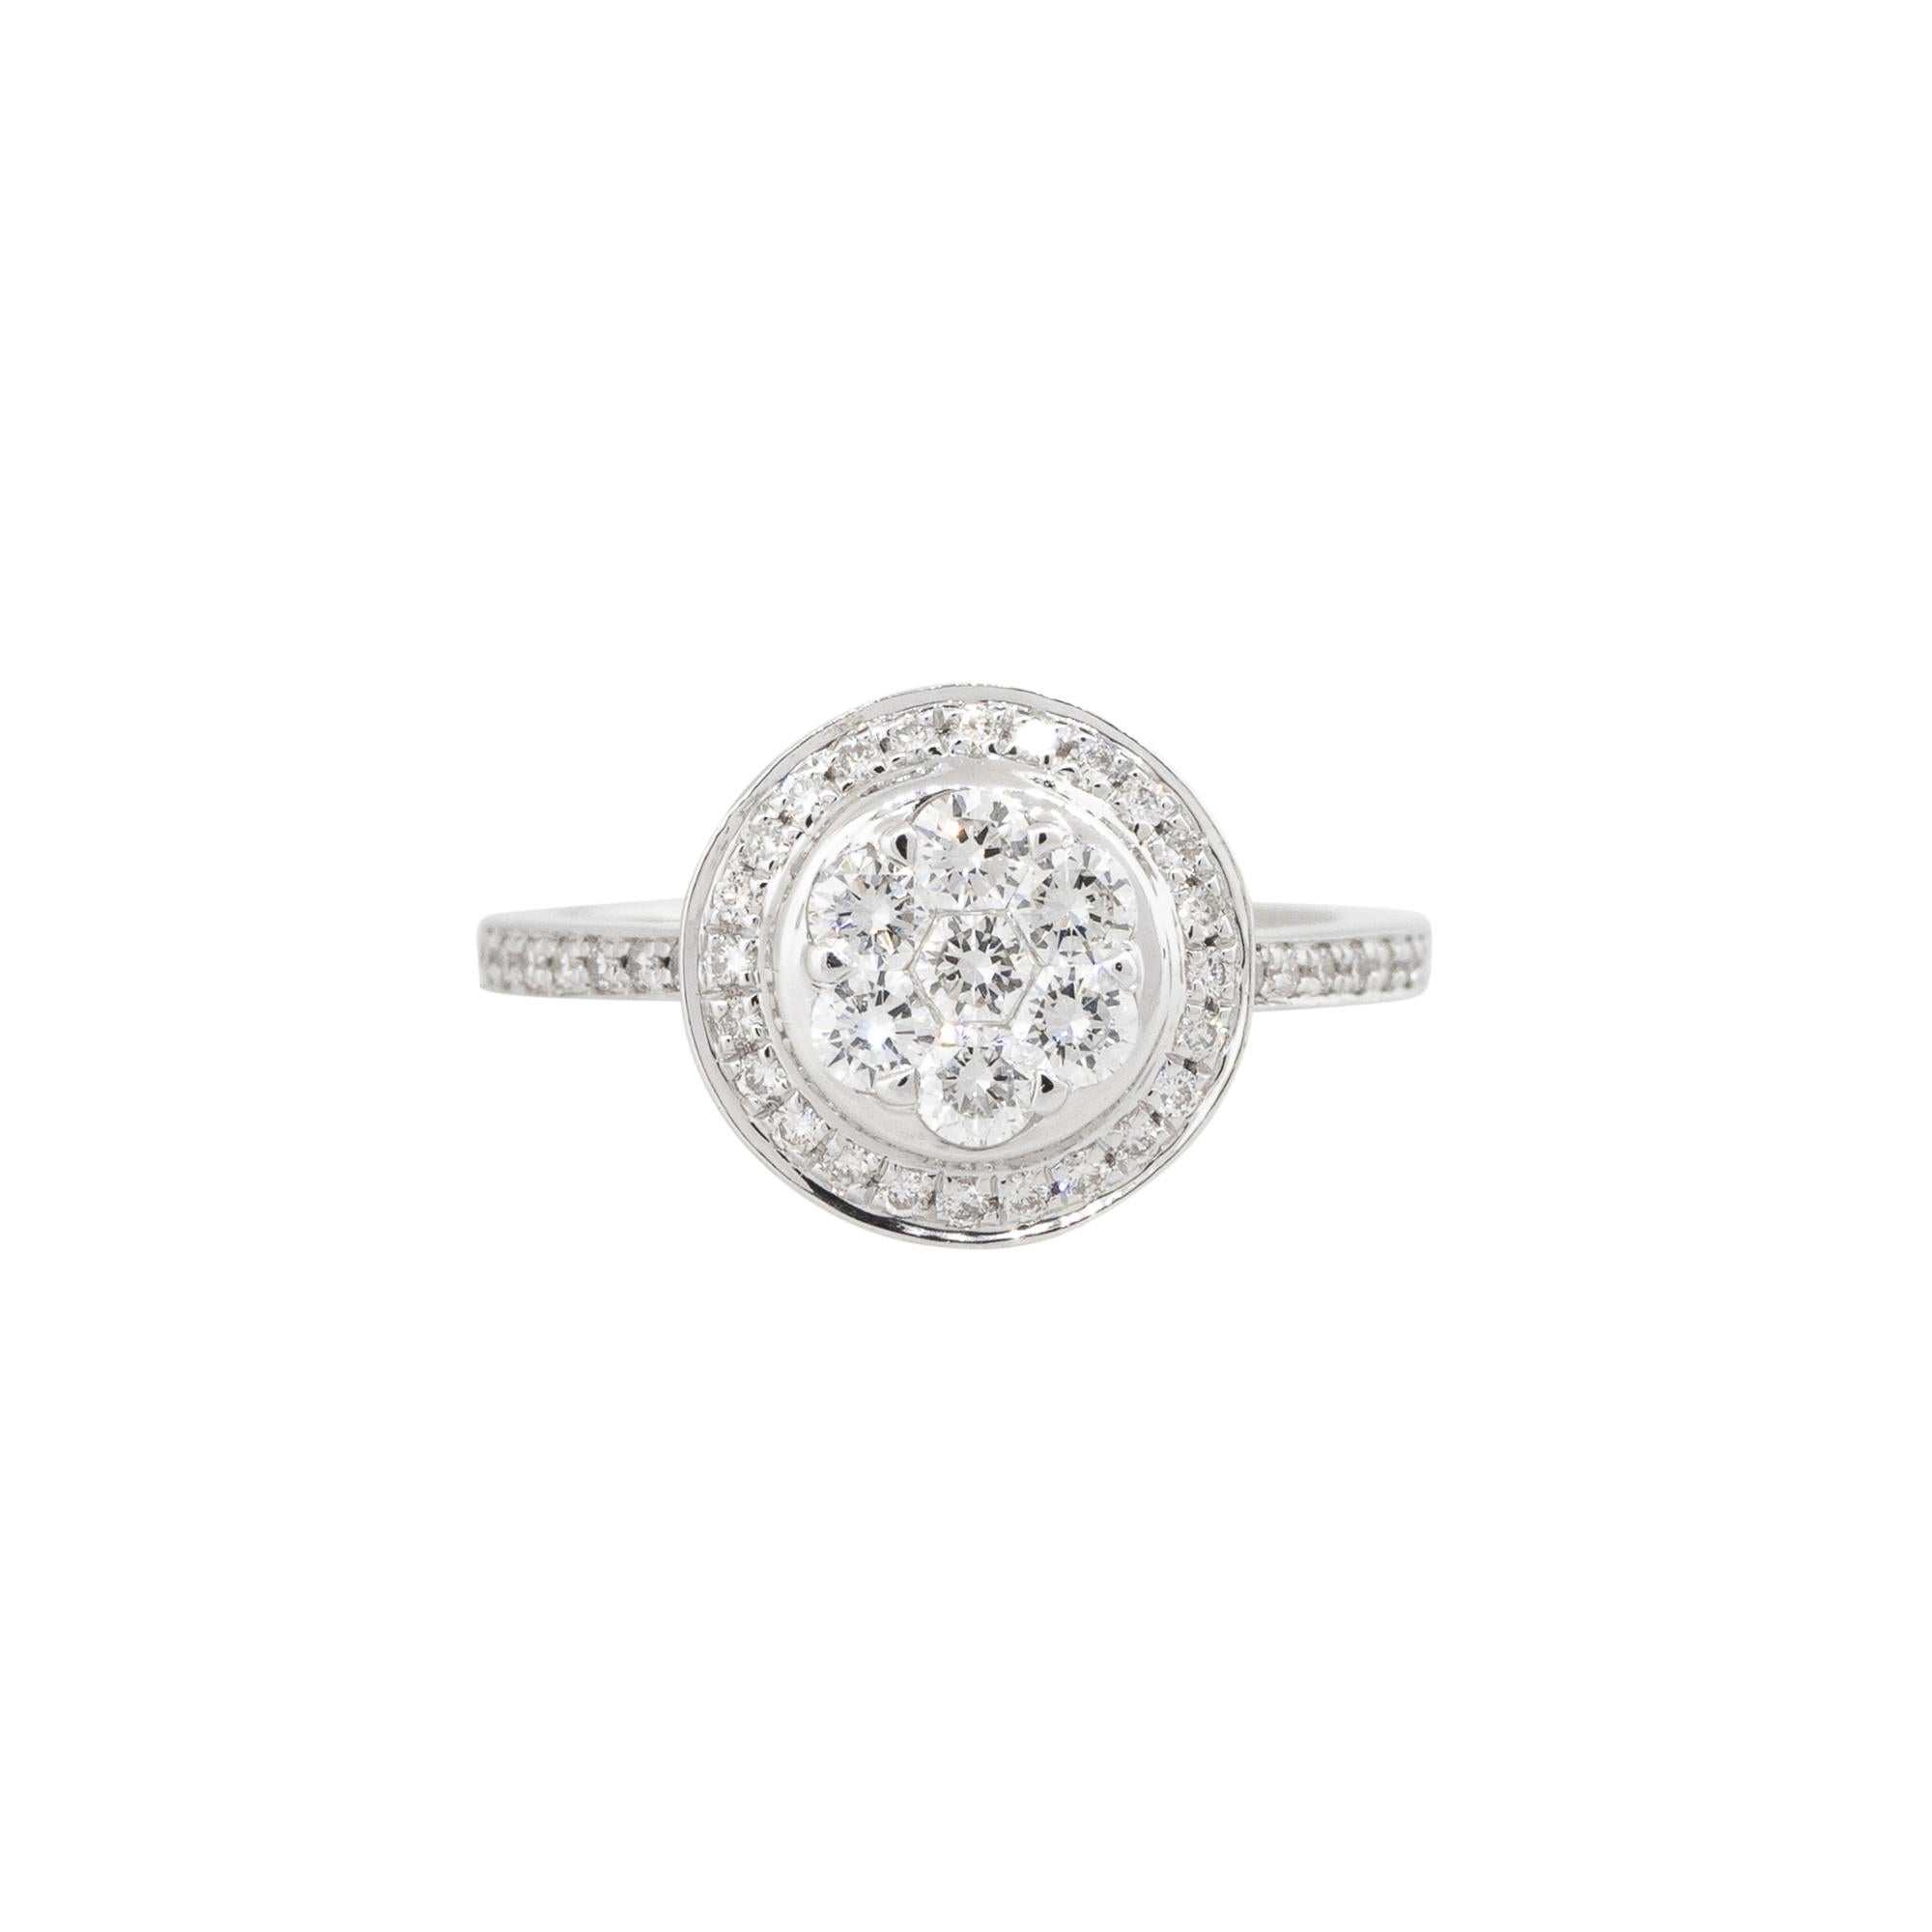 18k White Gold 0.60ctw Diamond Mosaic Cluster Halo Ring
Style: Women's Diamond Cluster Ring
Material: 18k White Gold
Main Diamond Details: Approximately 0.60ctw of Pave Set, Round Brilliant cut Diamonds
Ring Size: 7 (Can be sized)
Item Weight: 4.9g